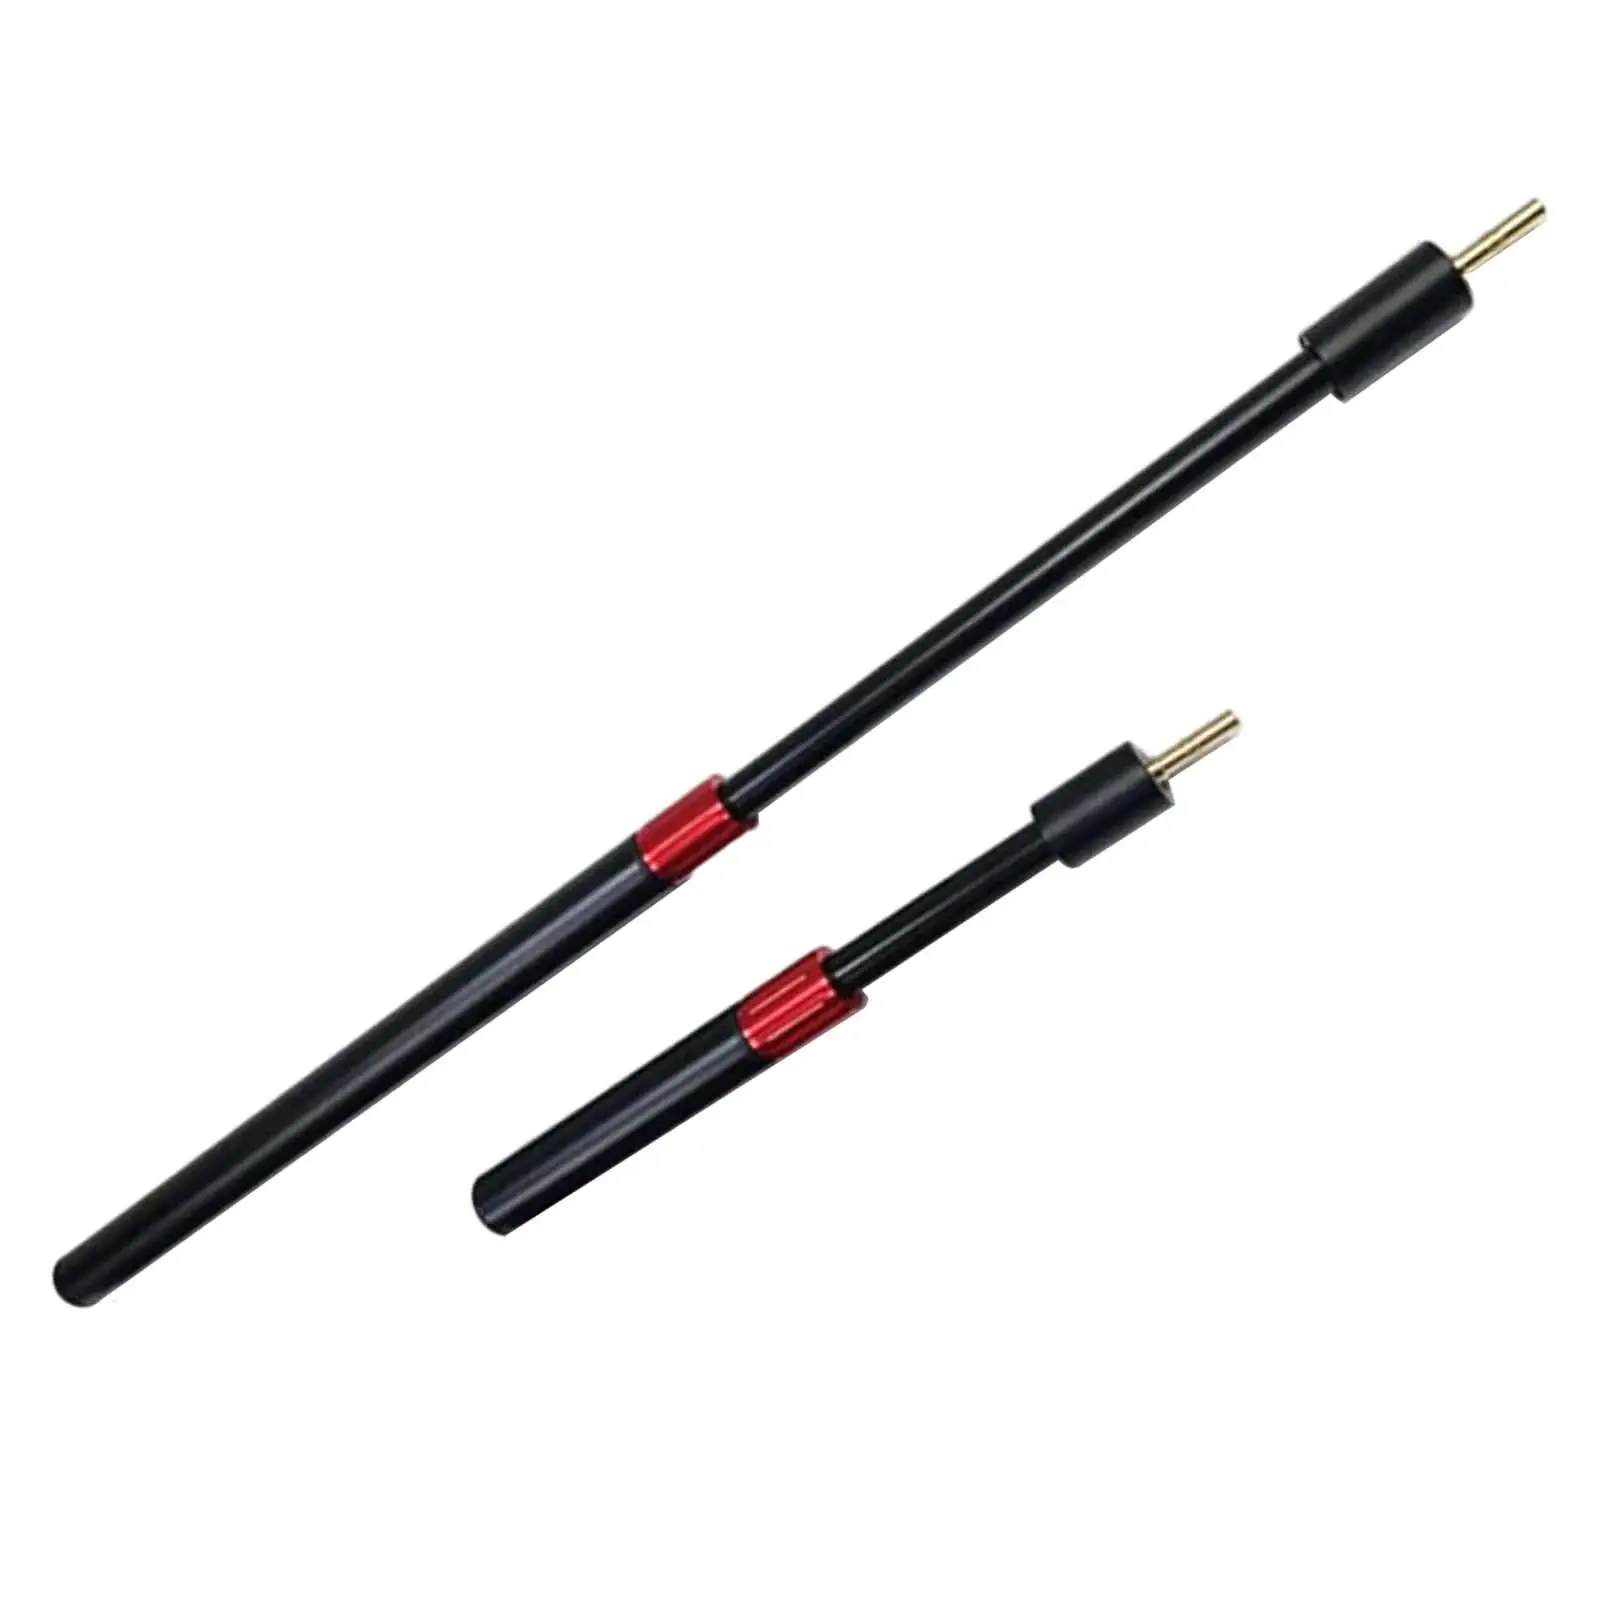 2Pcs Billiards Cue Extension 9inch 18inch Pool Cue Extender End Lengthener